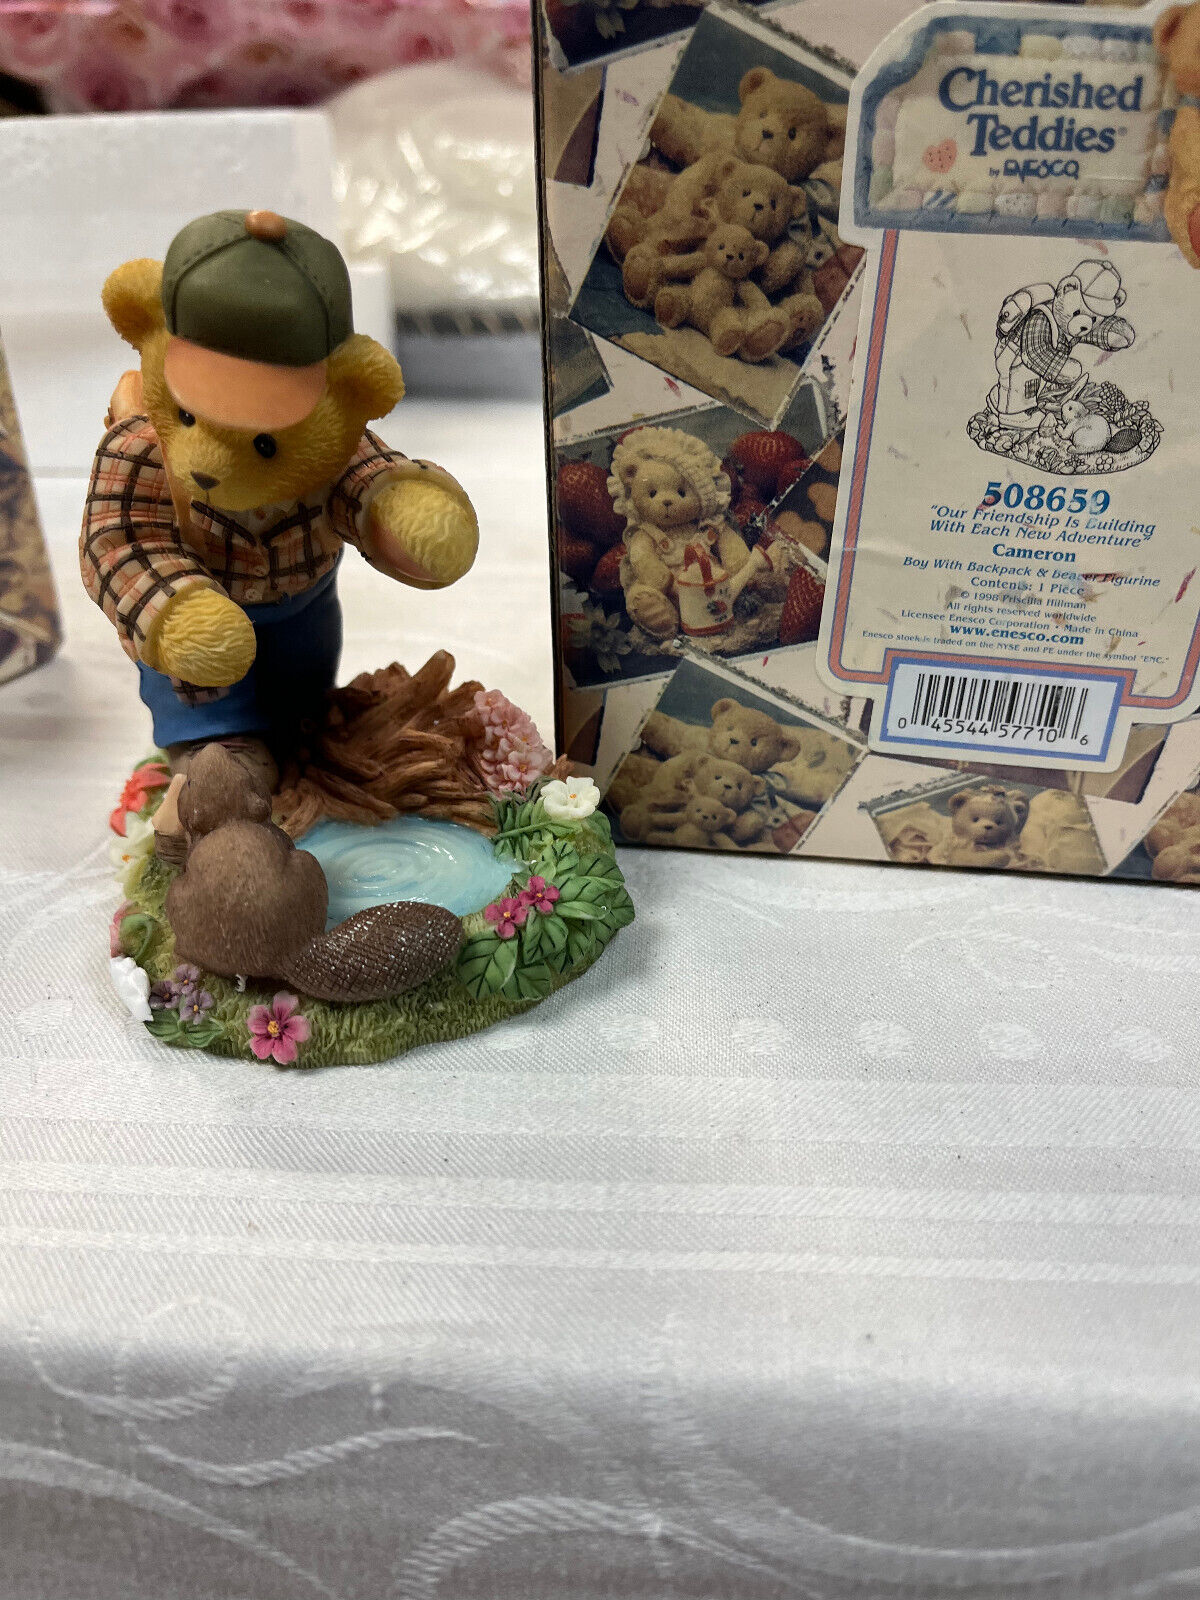 1998 Cherished Teddies Cameron Friendship Is Building Canadian Exclusive 508659